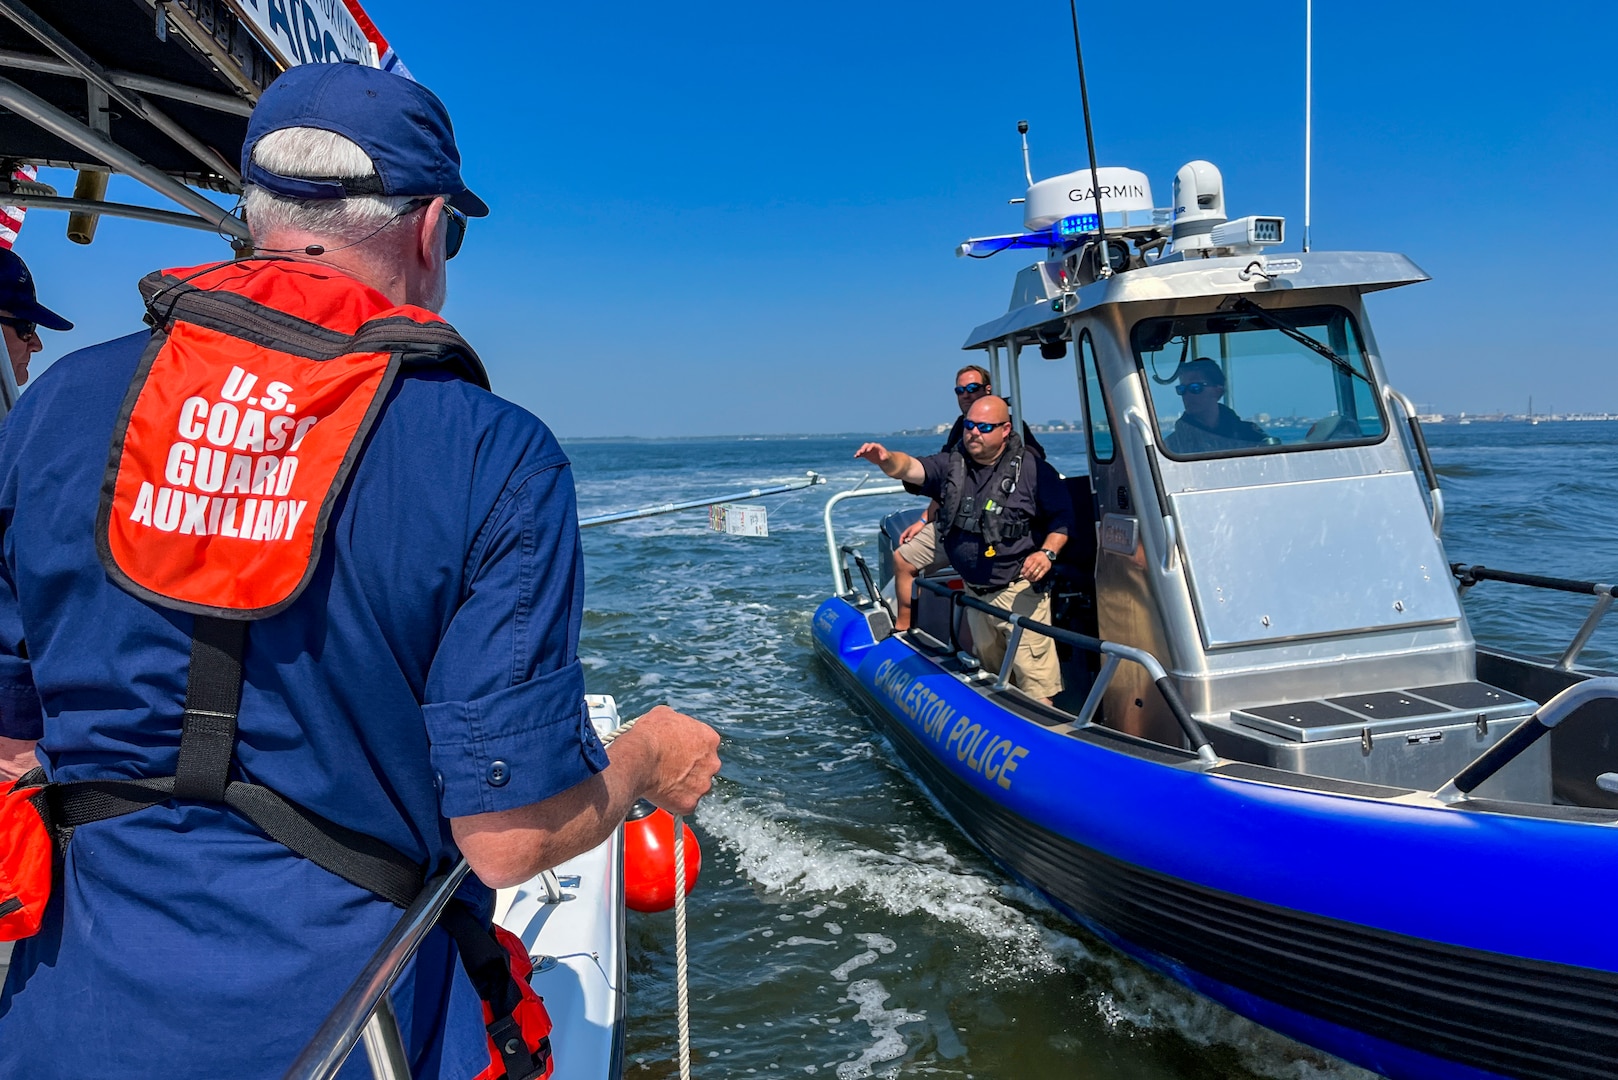 A Charleston Police Department boat crew member retrieves a survivor scenario card from a Coast Guard Auxiliary boat crew during a mass rescue exercise in the Port of Charleston, South Carolina, June 28, 2023.